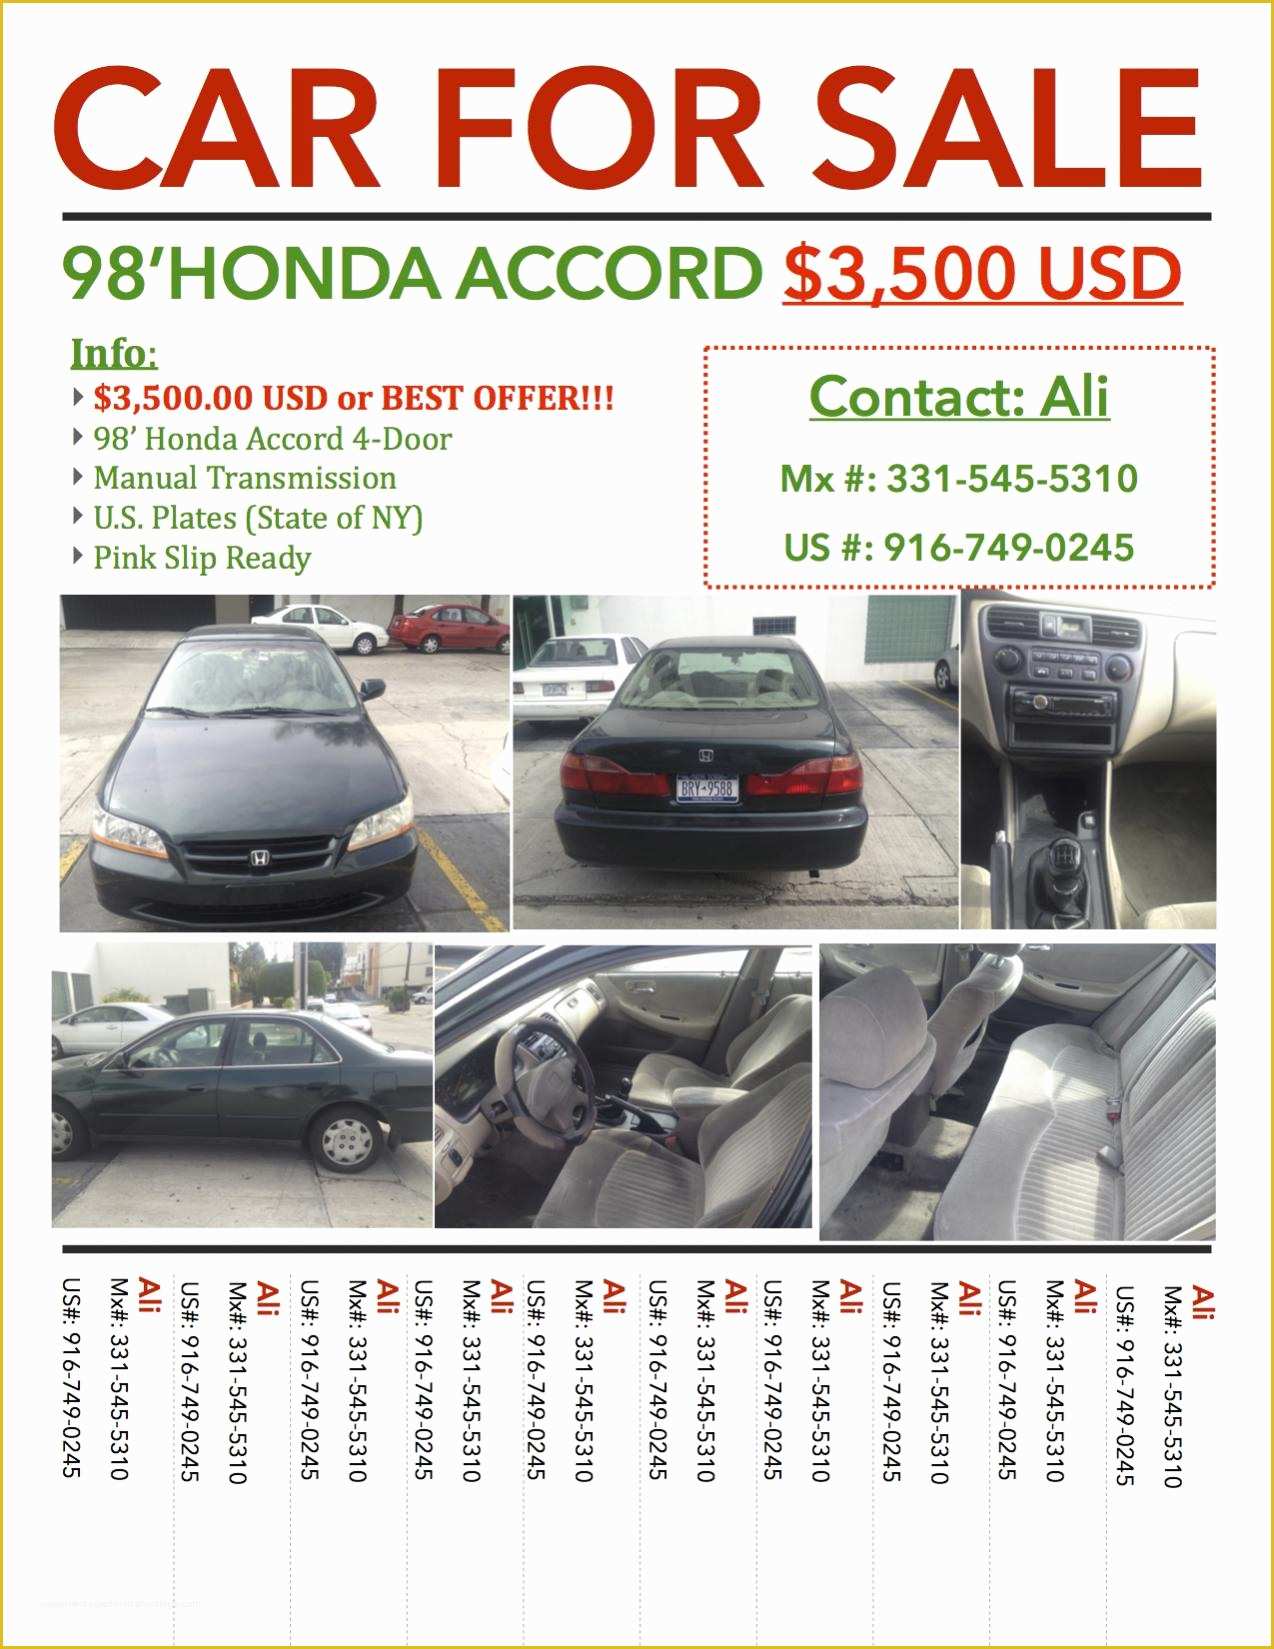 Car for Sale Flyer Template Free Of Car for Sale Honda Accord